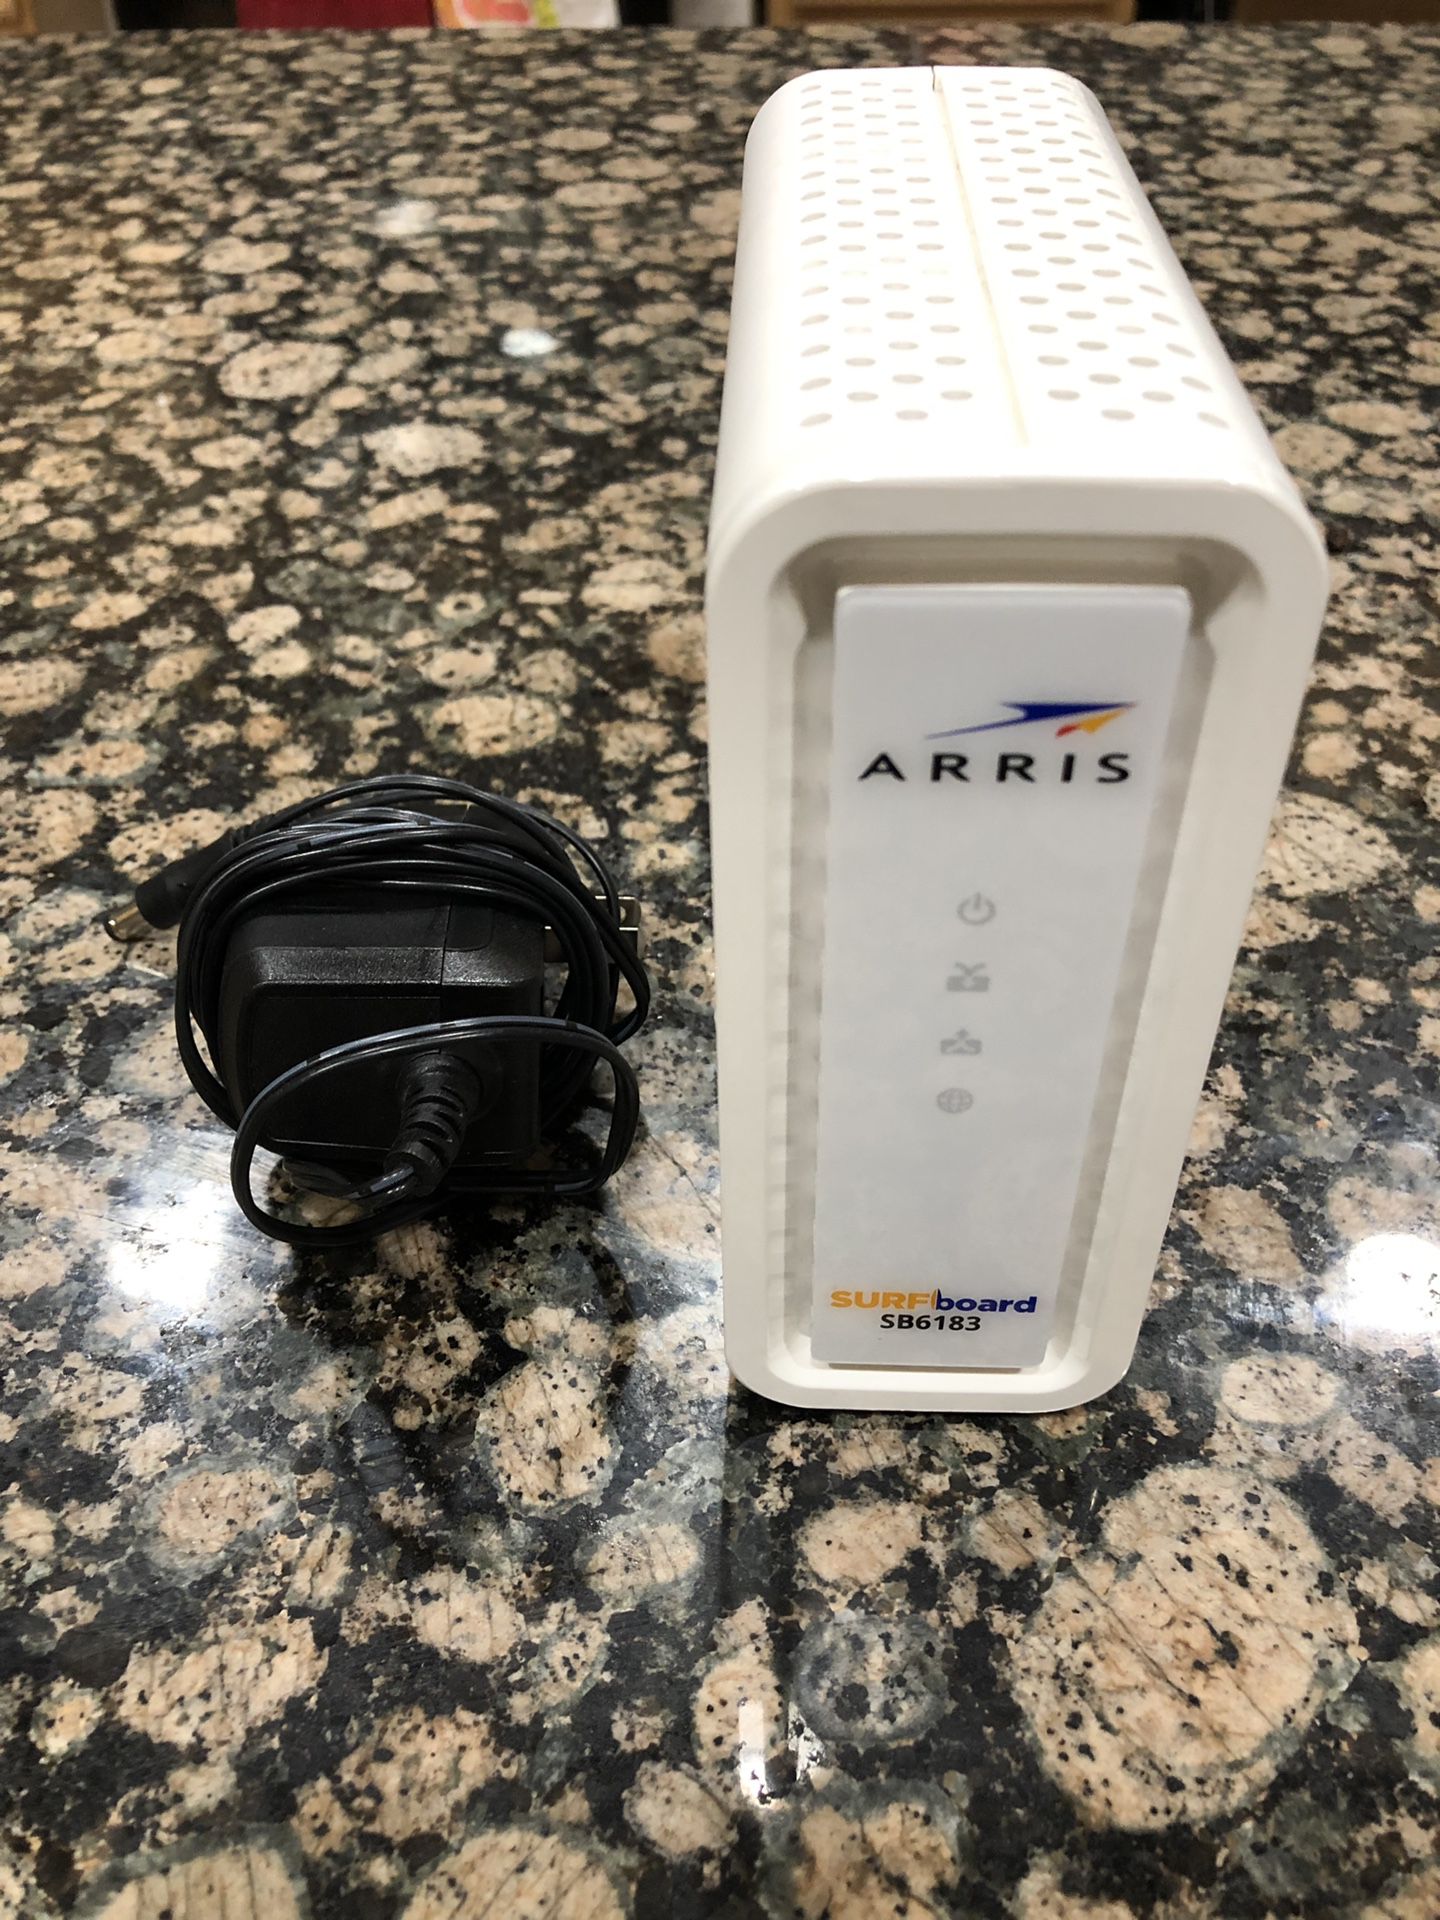 Arris SB6183 Cable Model (Cox Ultimate 300 mbps)